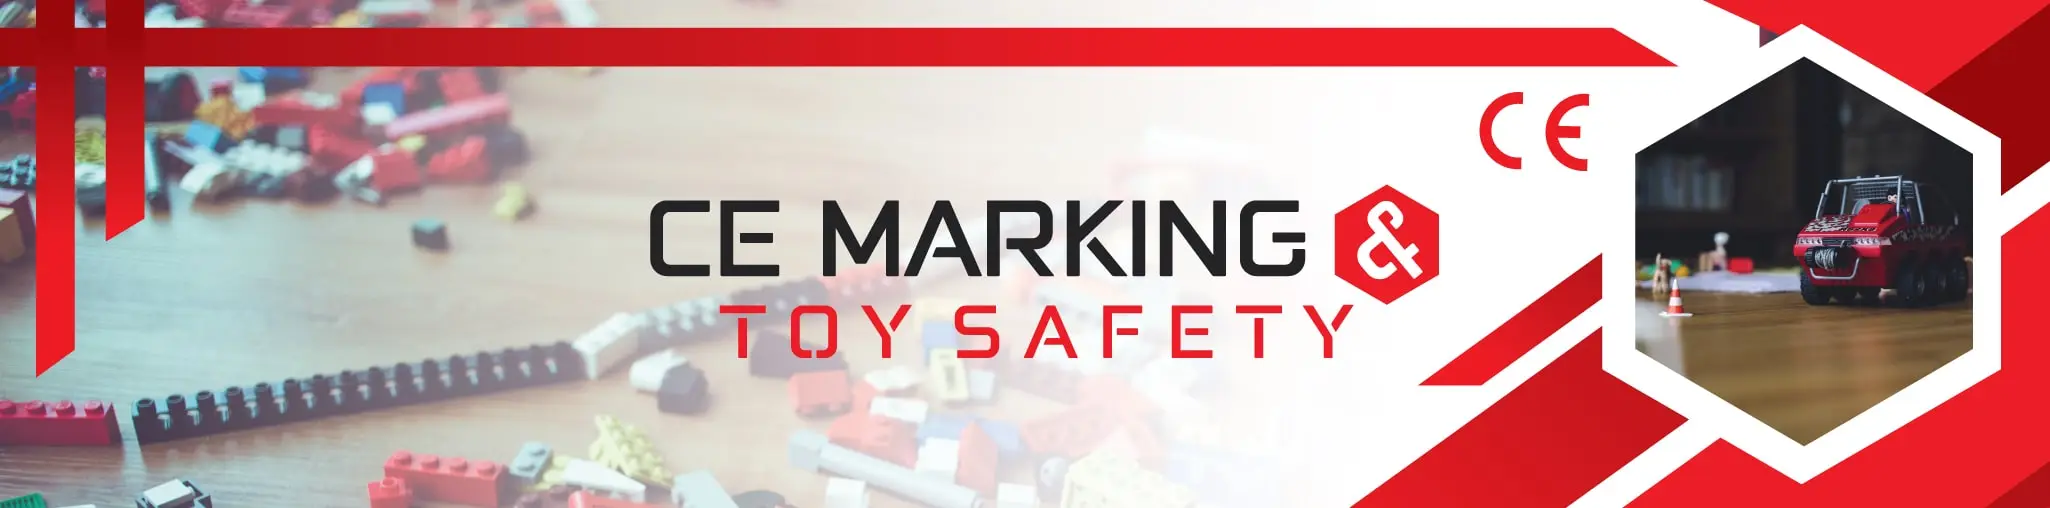 CE Marking Toy Safety